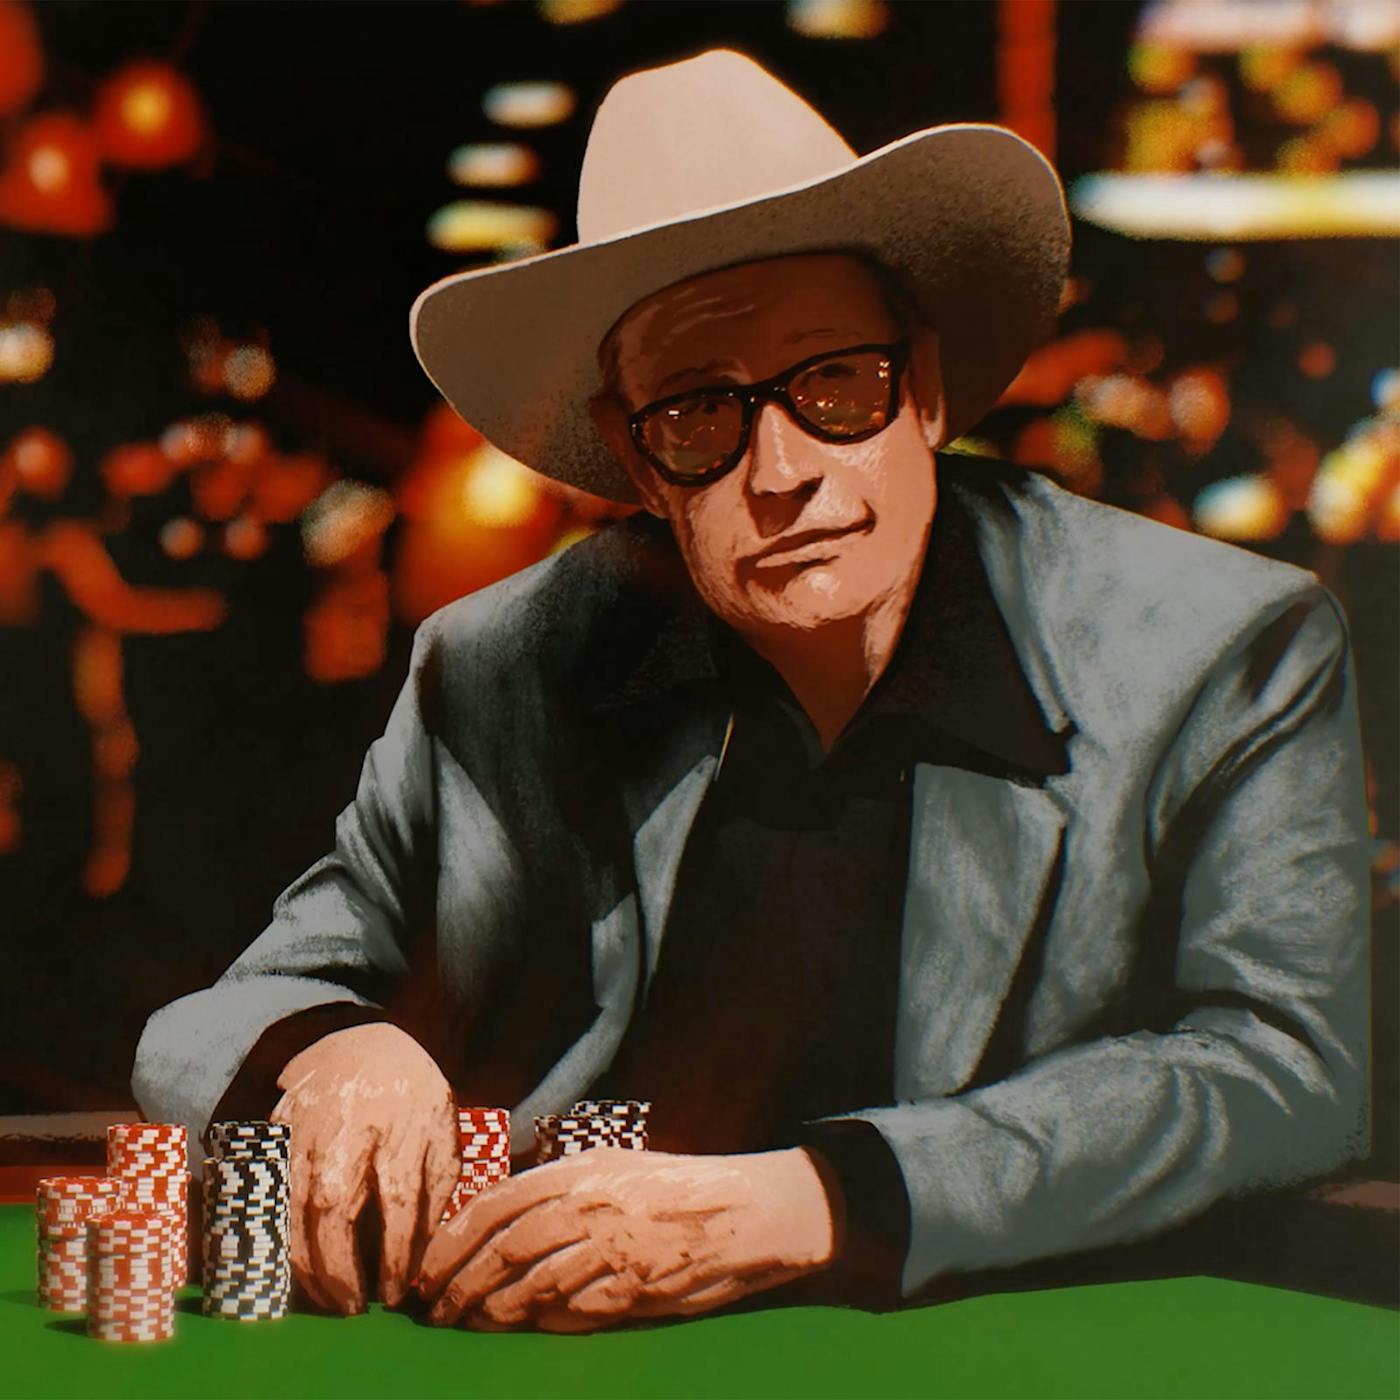 Privileged amplification garbage At 88, Poker Legend Doyle Brunson Is Still Bluffing. Or Is He?